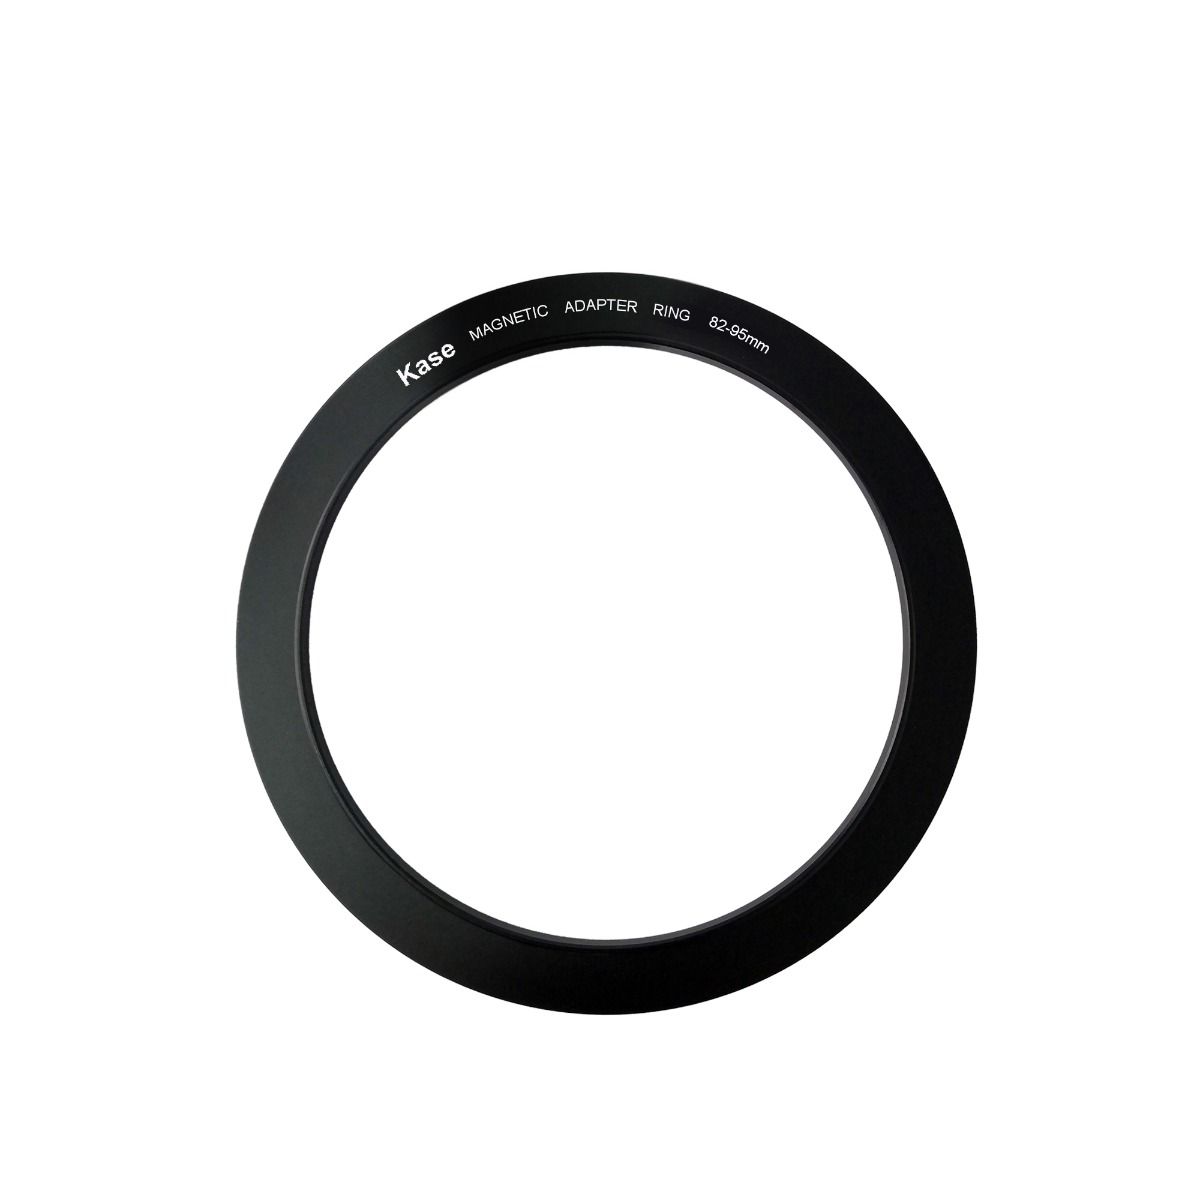 Product Image of Kase 77-95mm magnetic circular step up ring